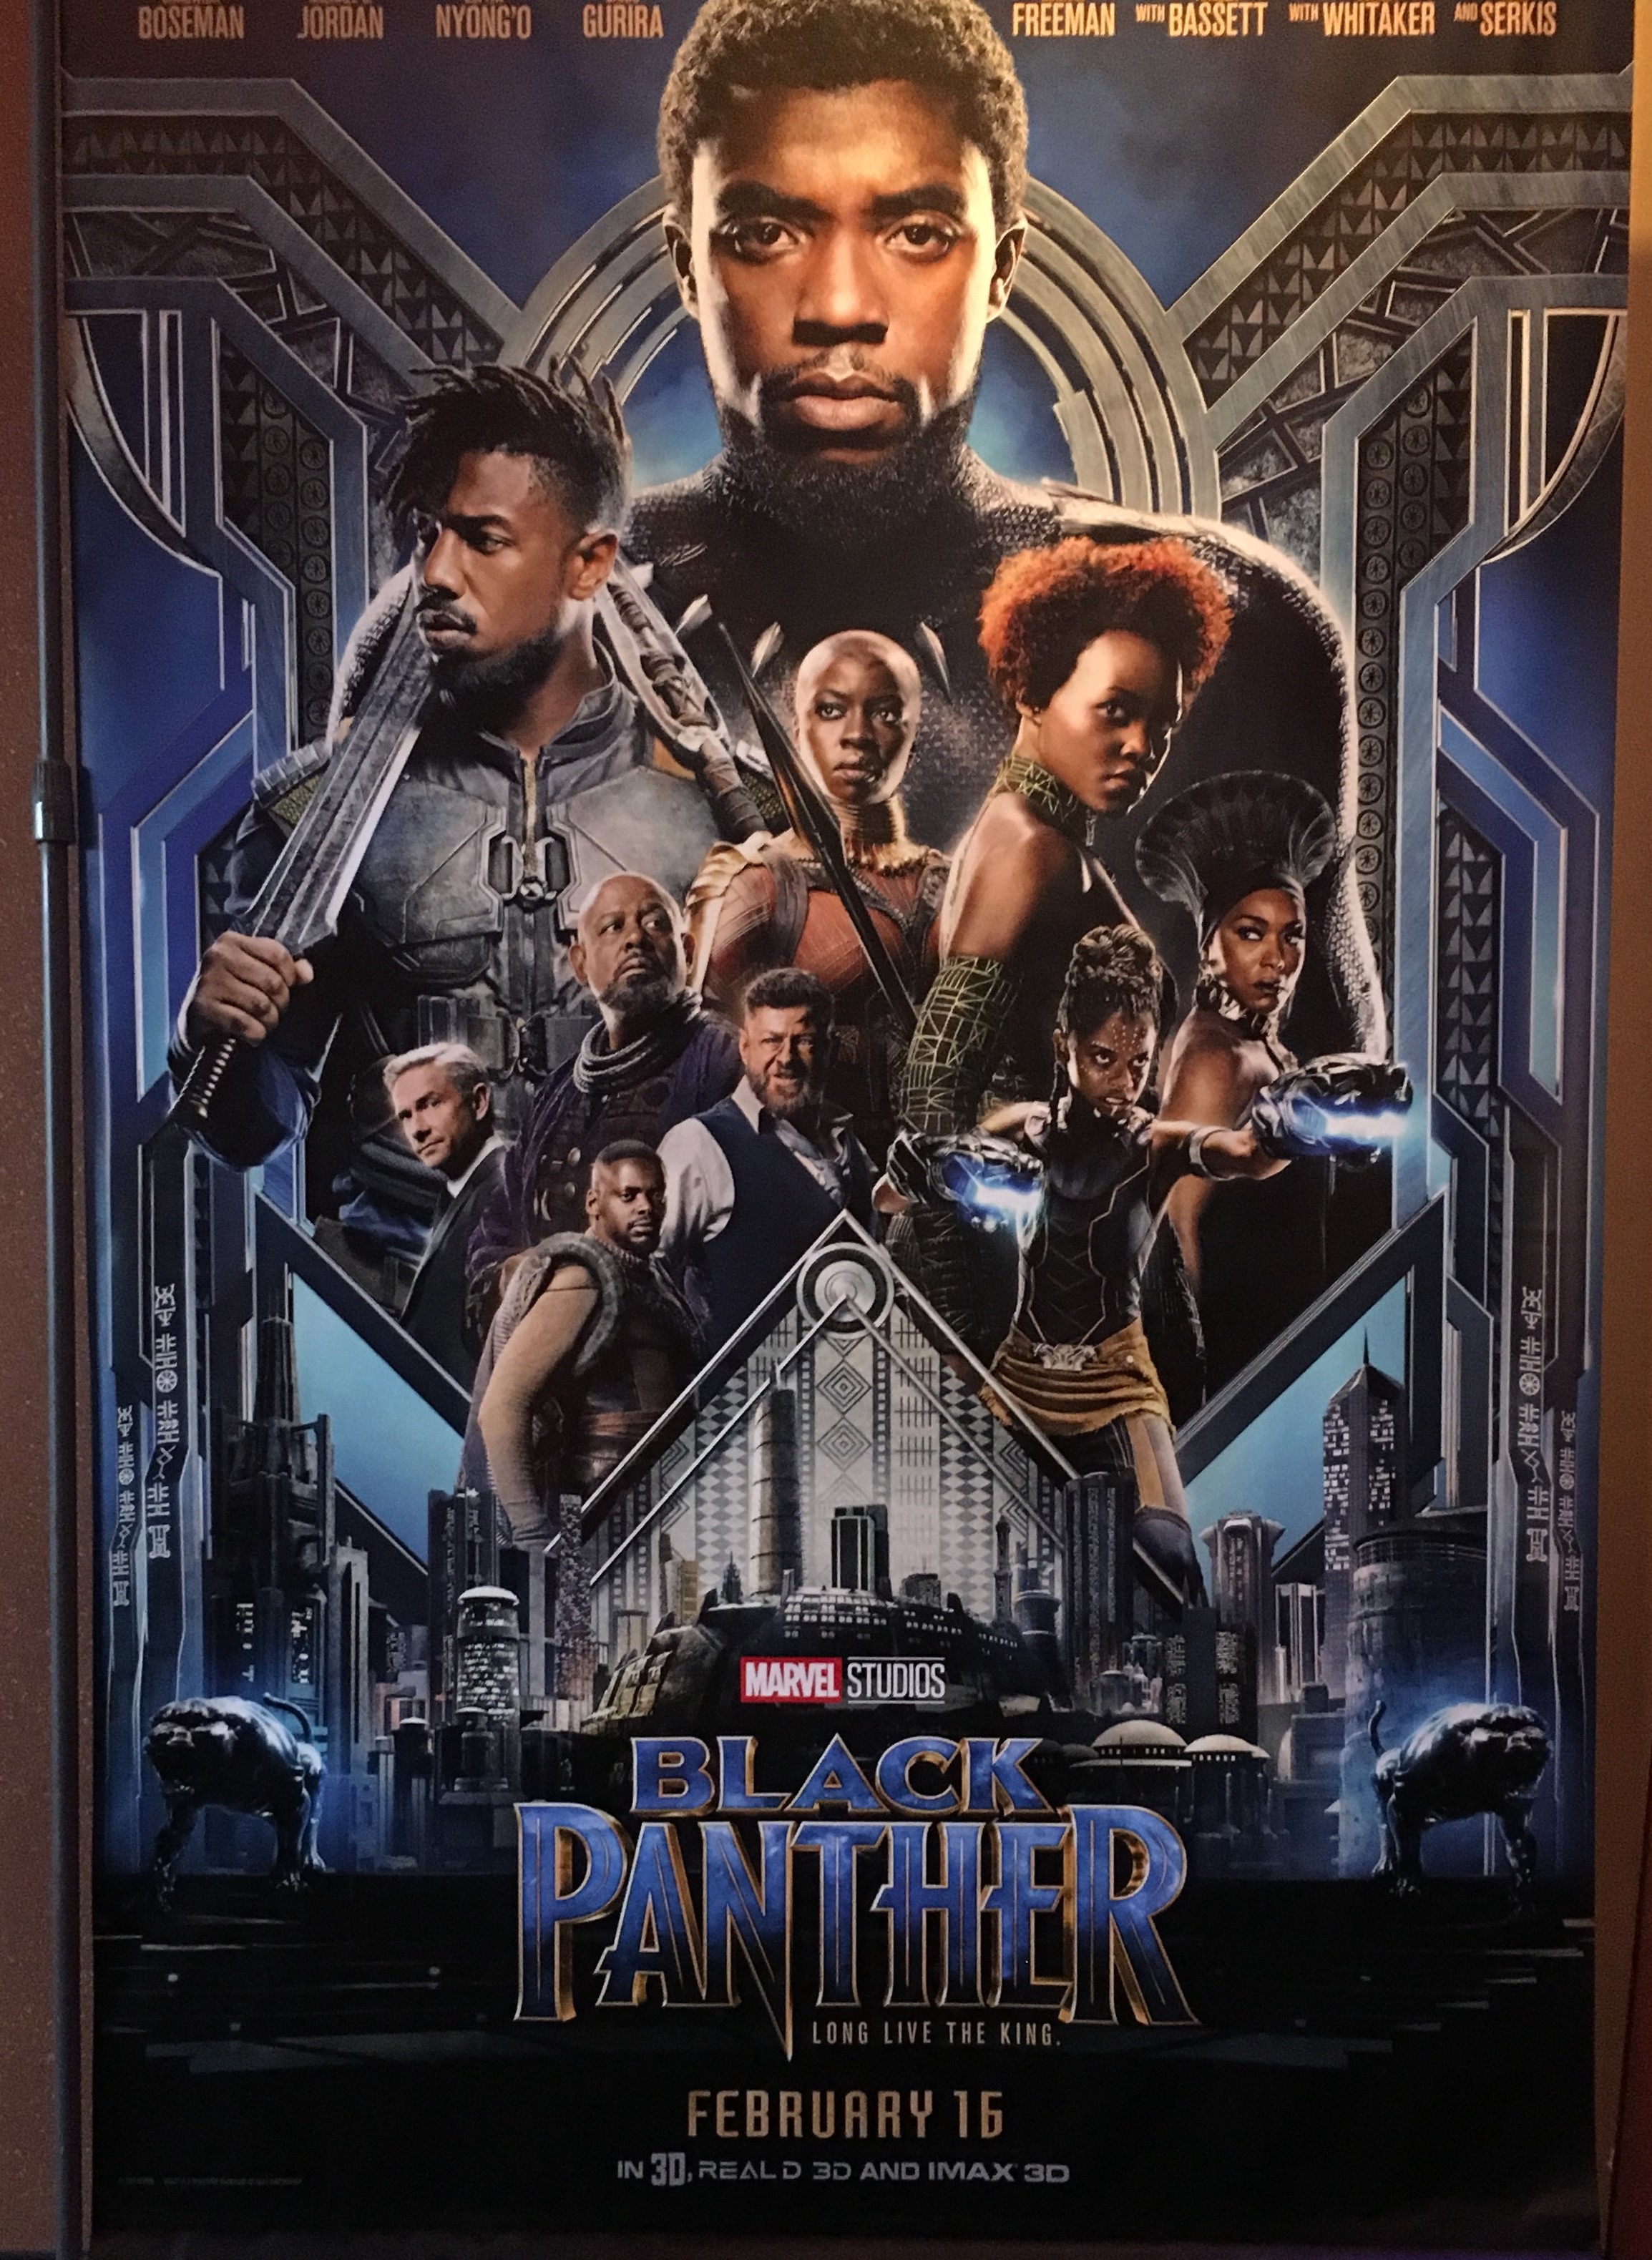 Black Panther Offers a Unique View of African Culture